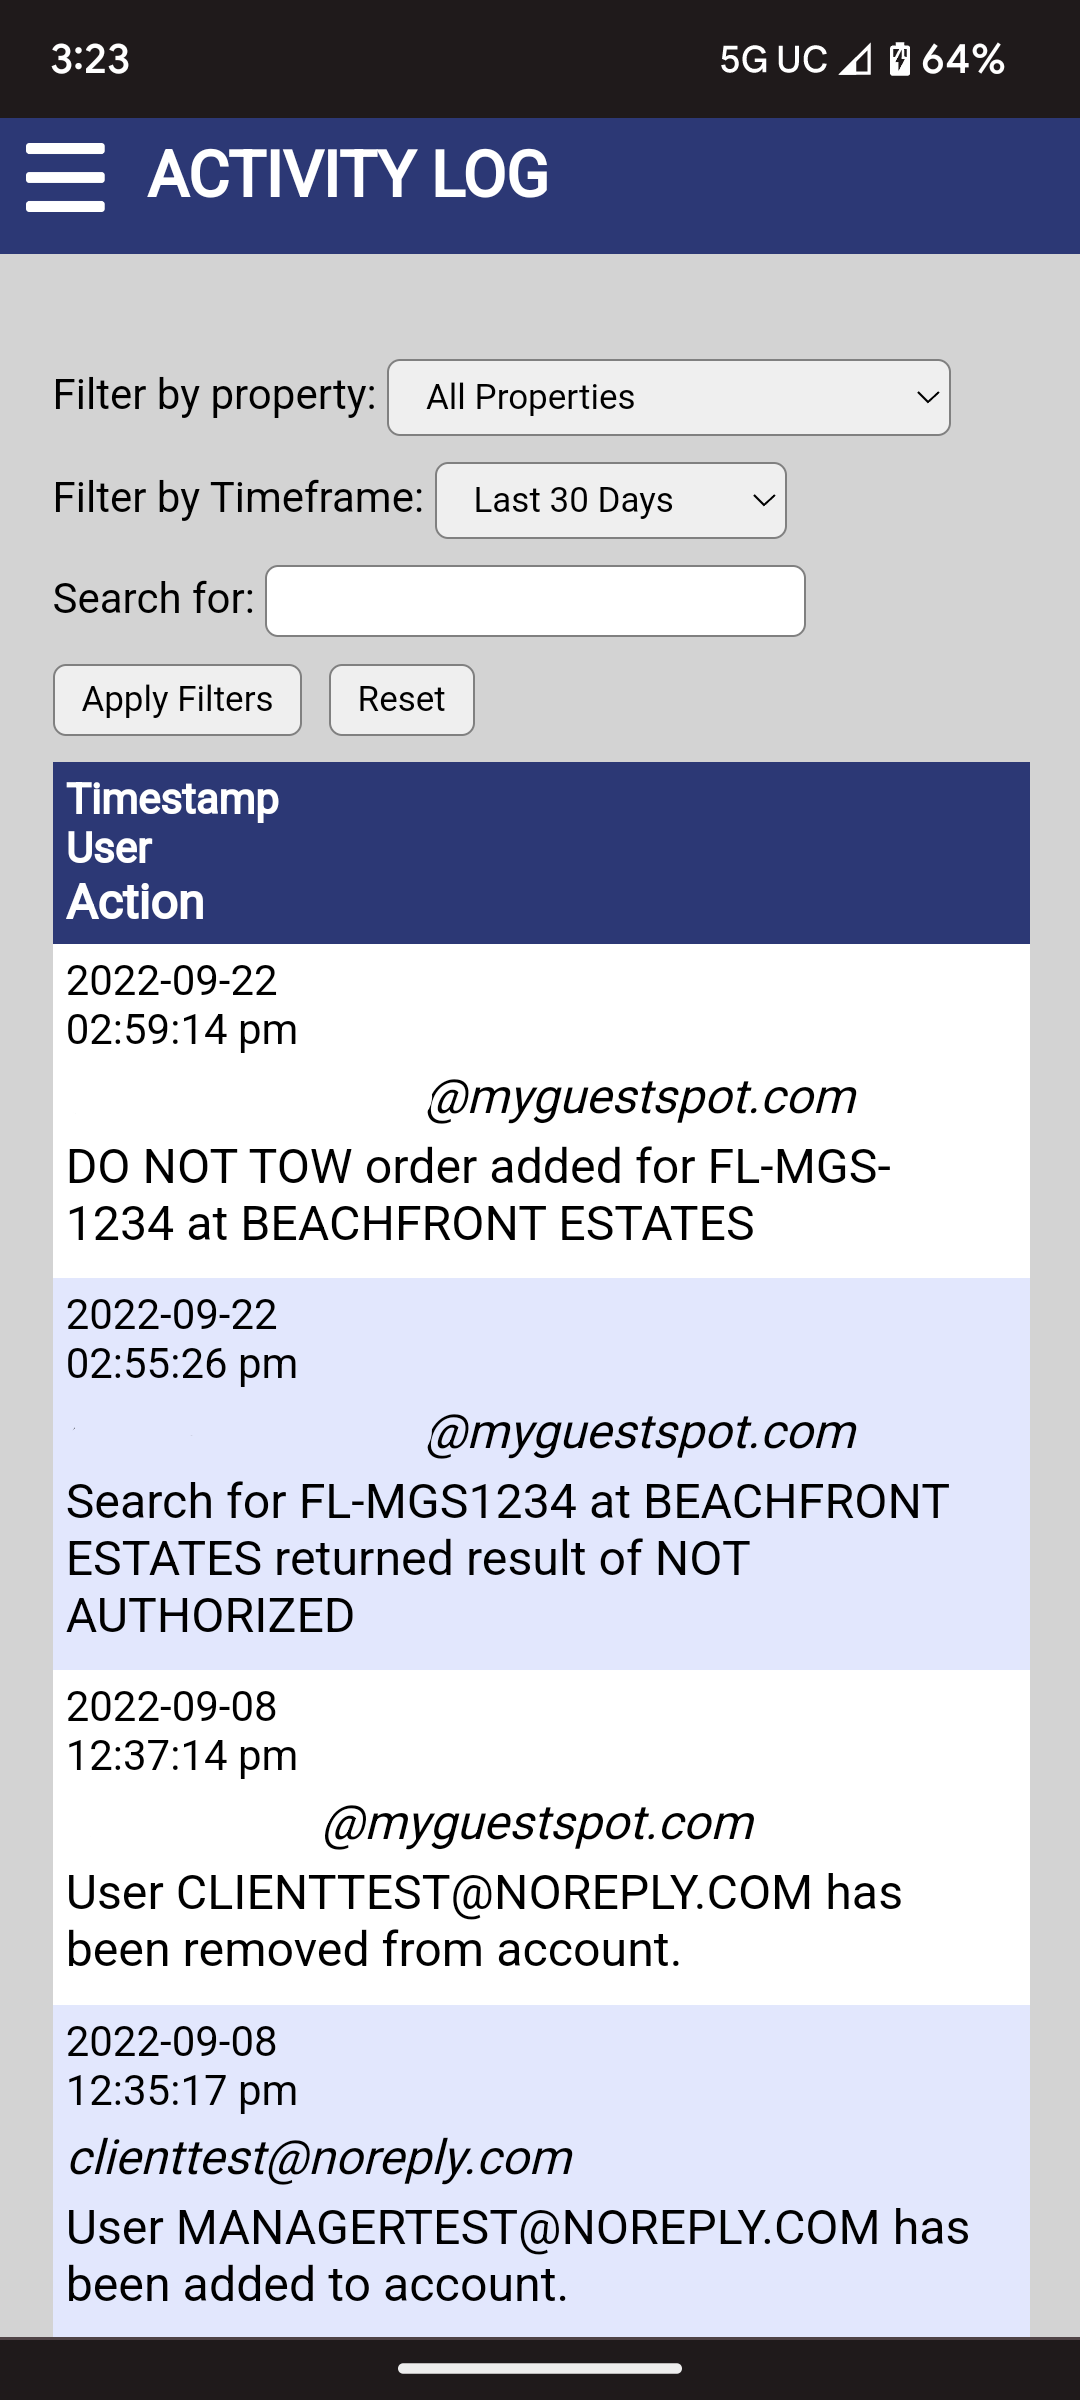 The MGS "Activity Log" time stamps all critical information related to the permitting process so that in the event an accusation is made of a "bad tow", the user can search the history of the vehicle and determine the facts of the case.